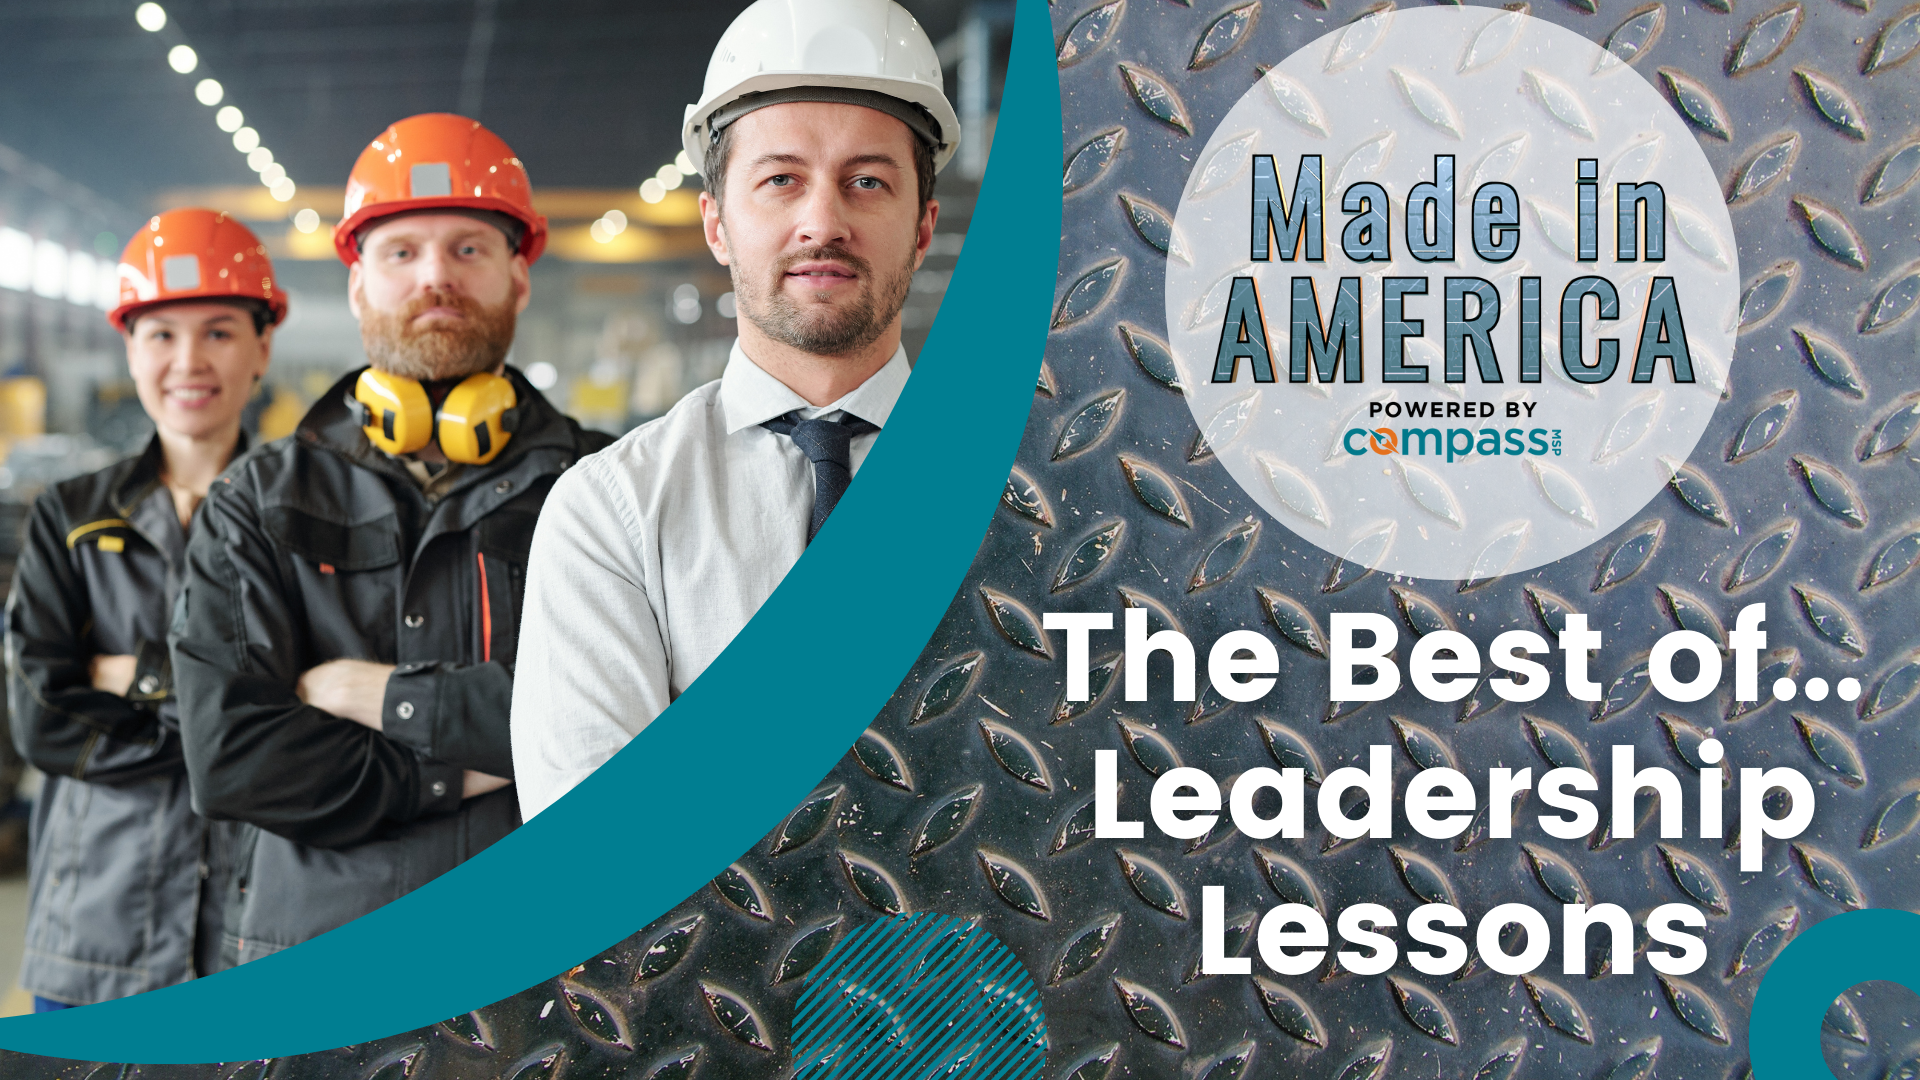 The Best of...Leadership Lessons